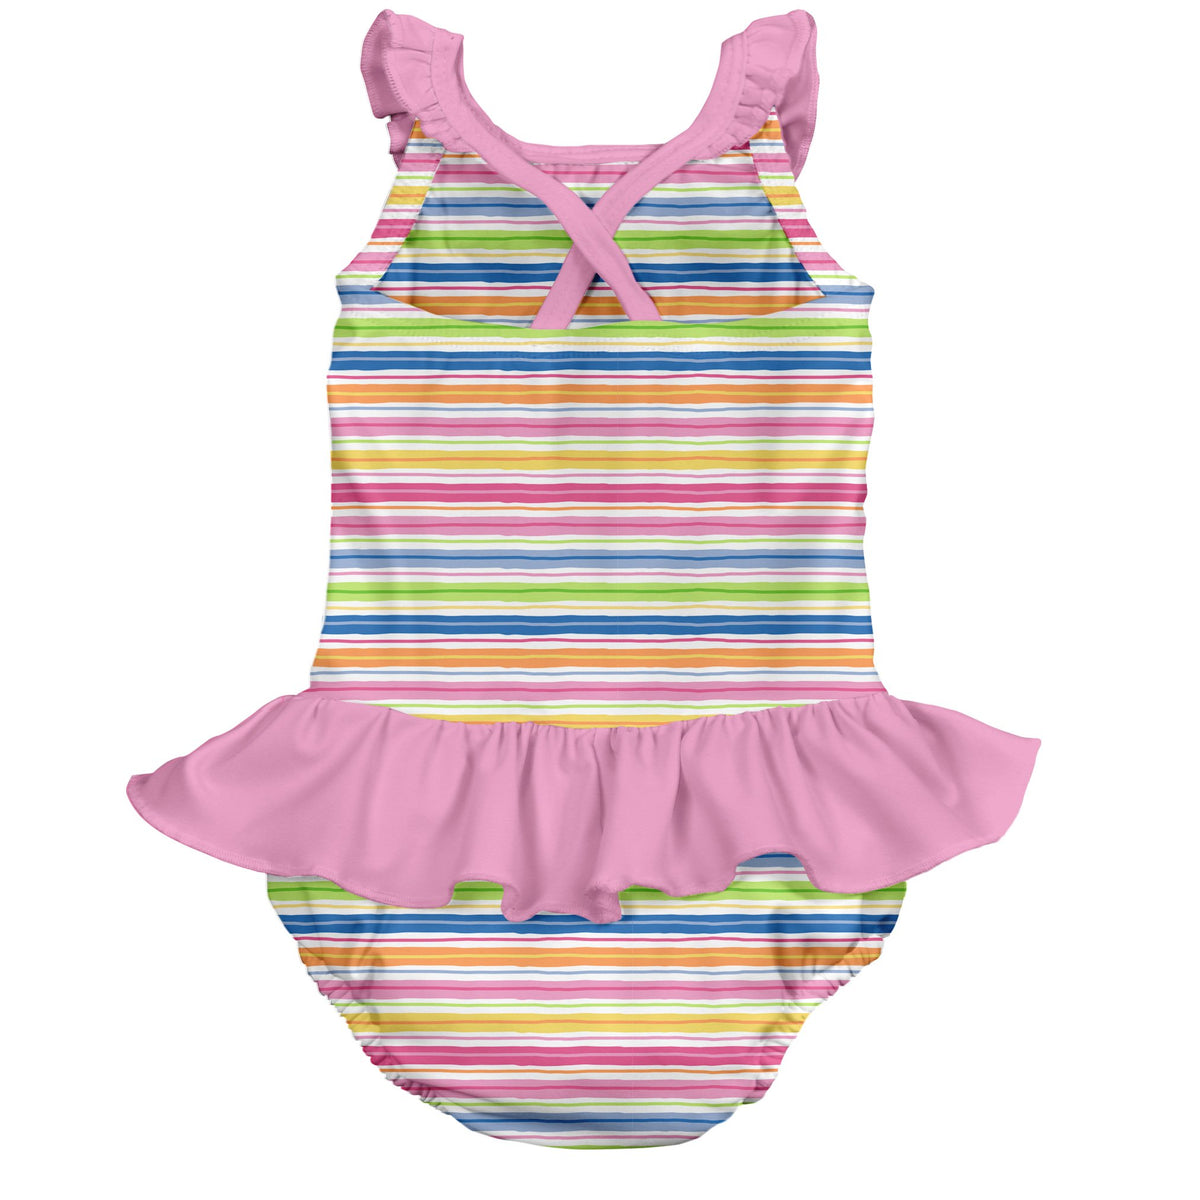 Ruffle Swimsuit with built in Swim Nappy - Pink Wavy